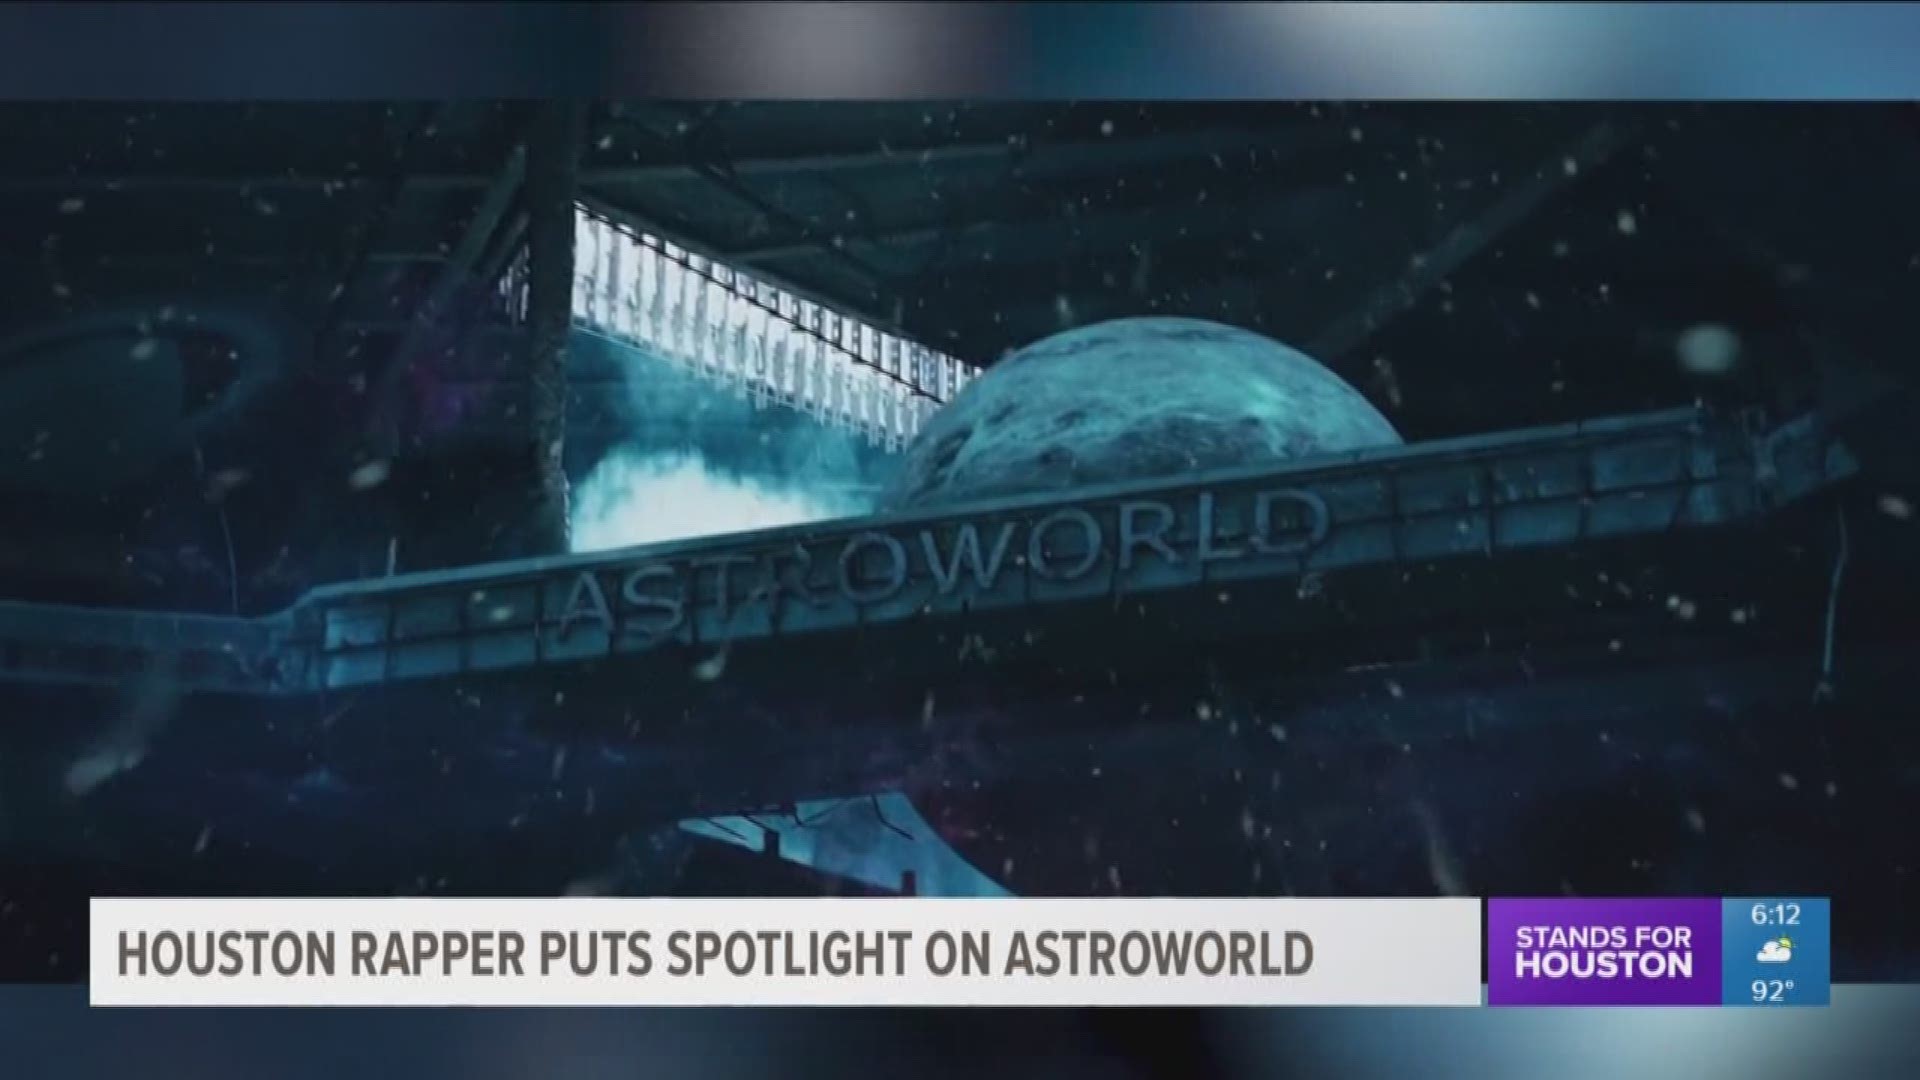 The word "Astroworld" is more than just a name of an album for those who got a chance to experience the Six Flags park.